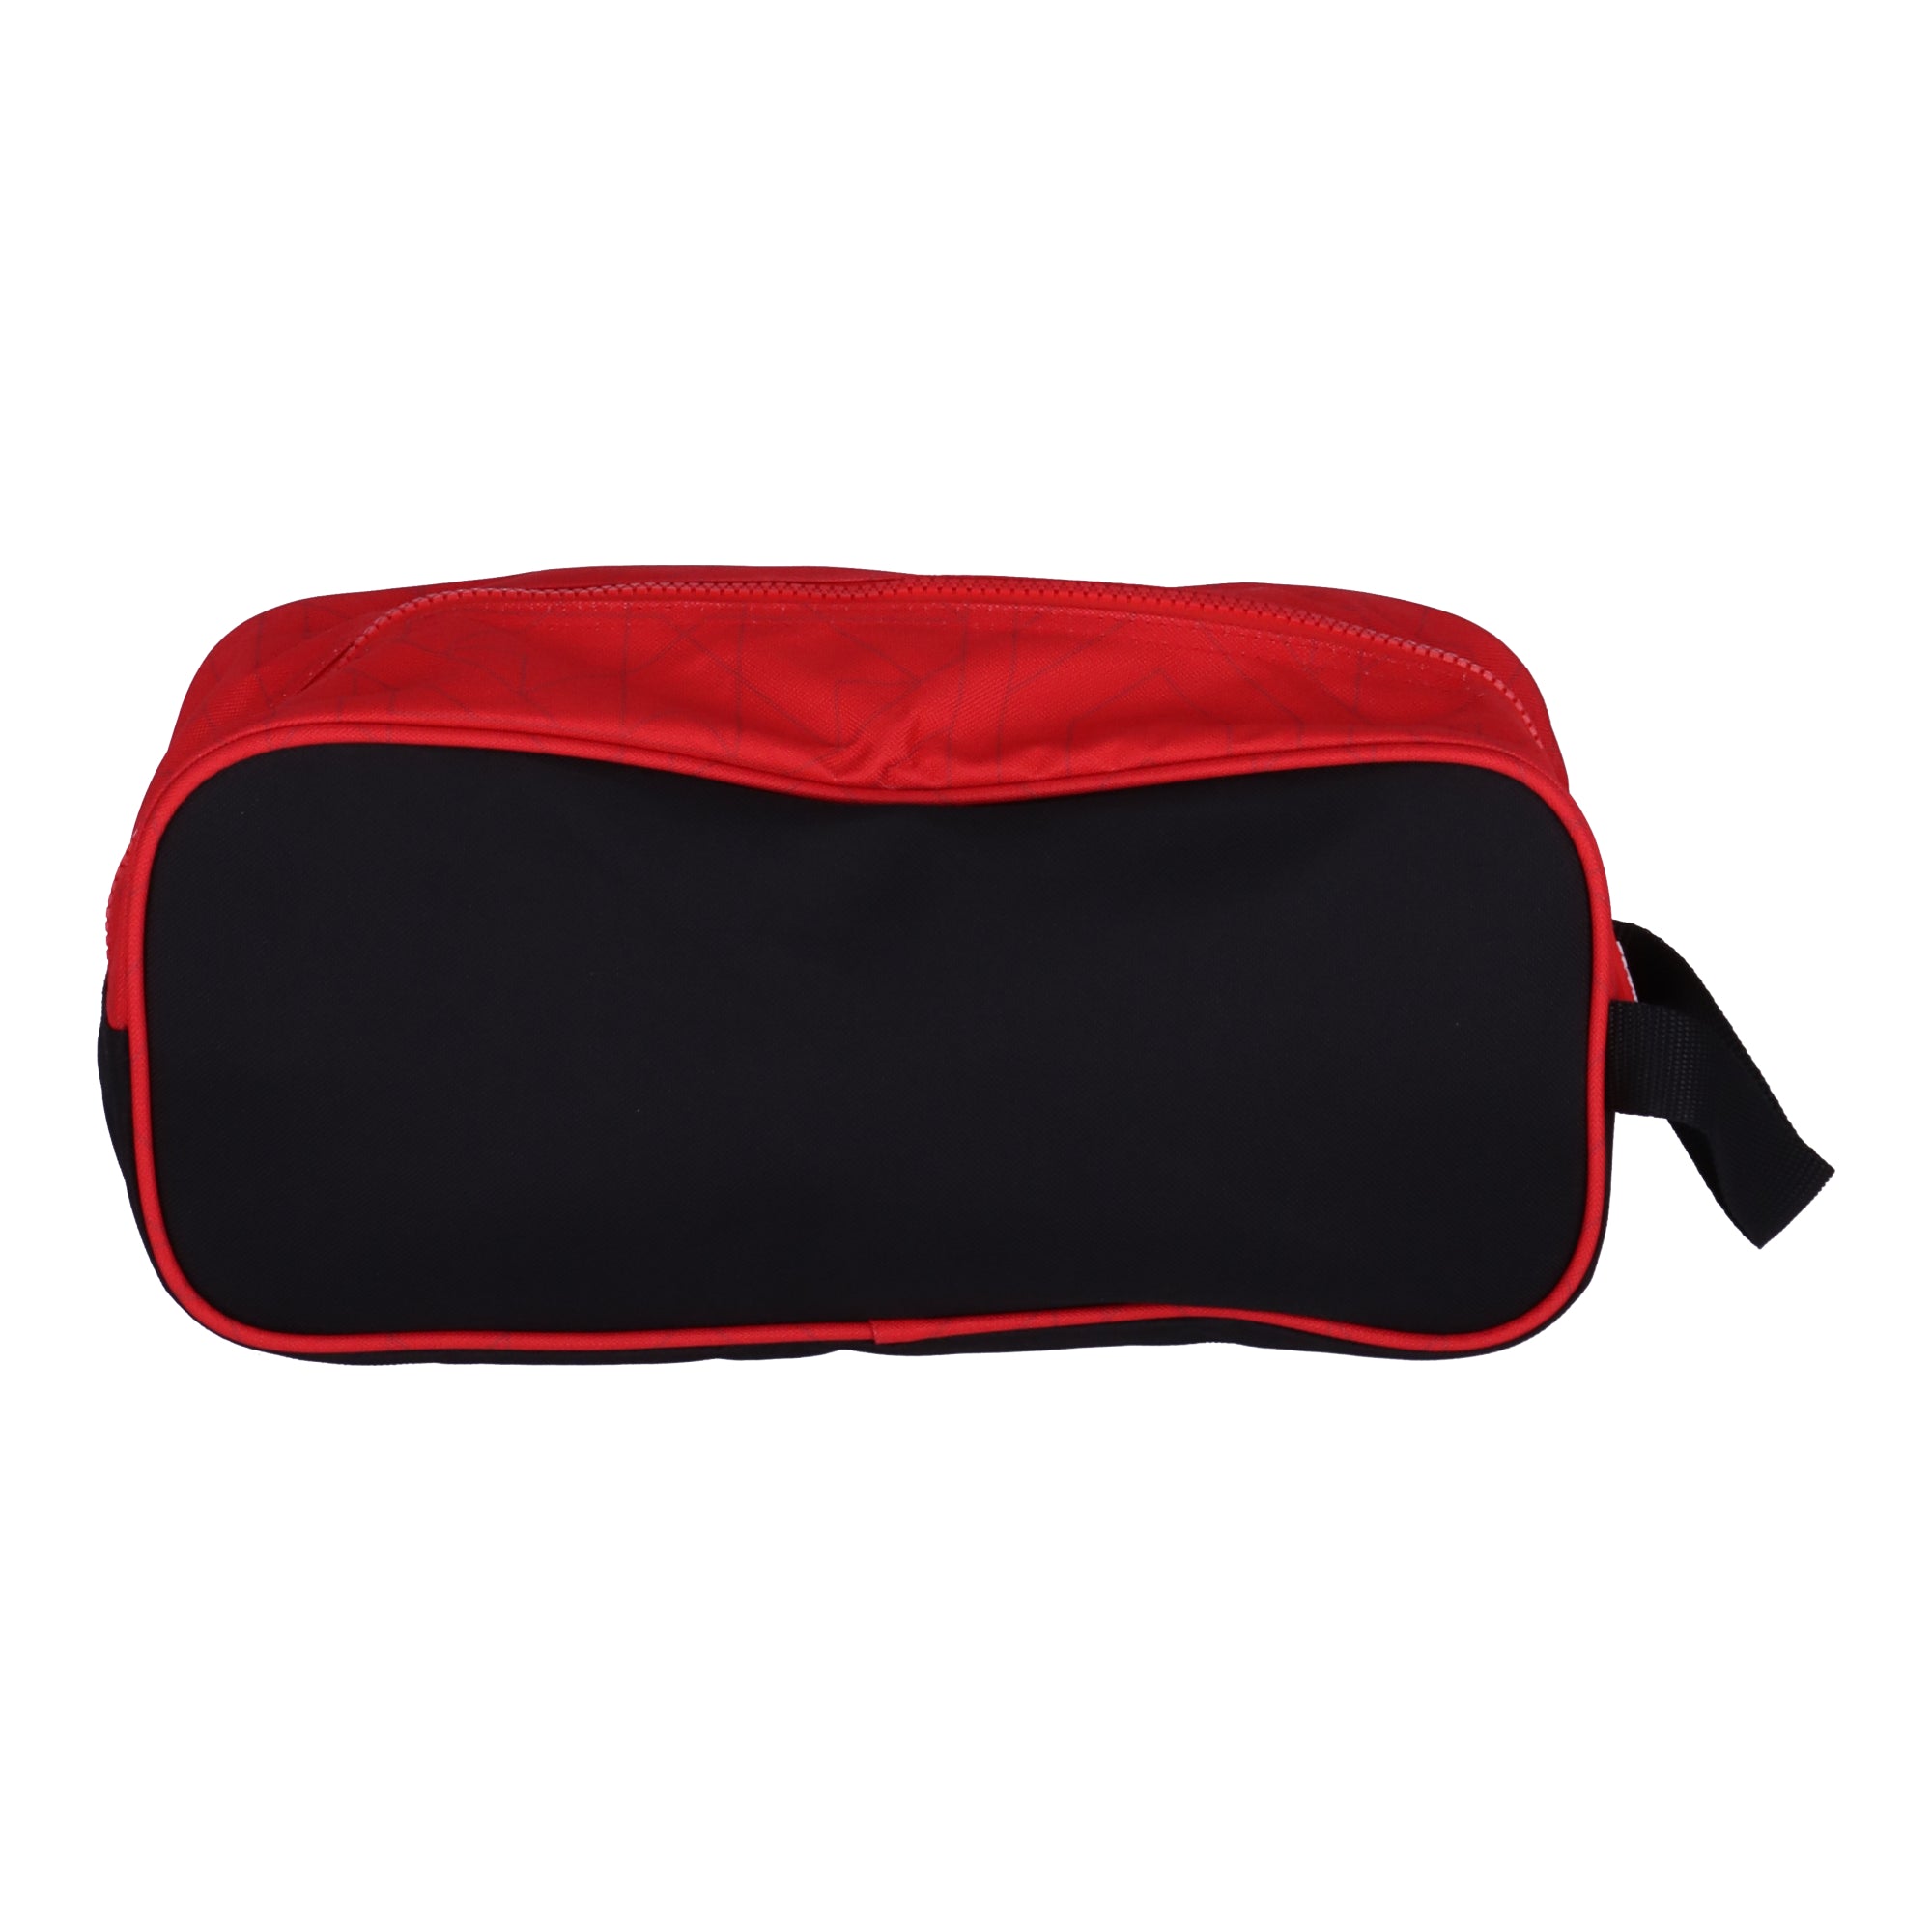 Red shoe bag with handle 23/24